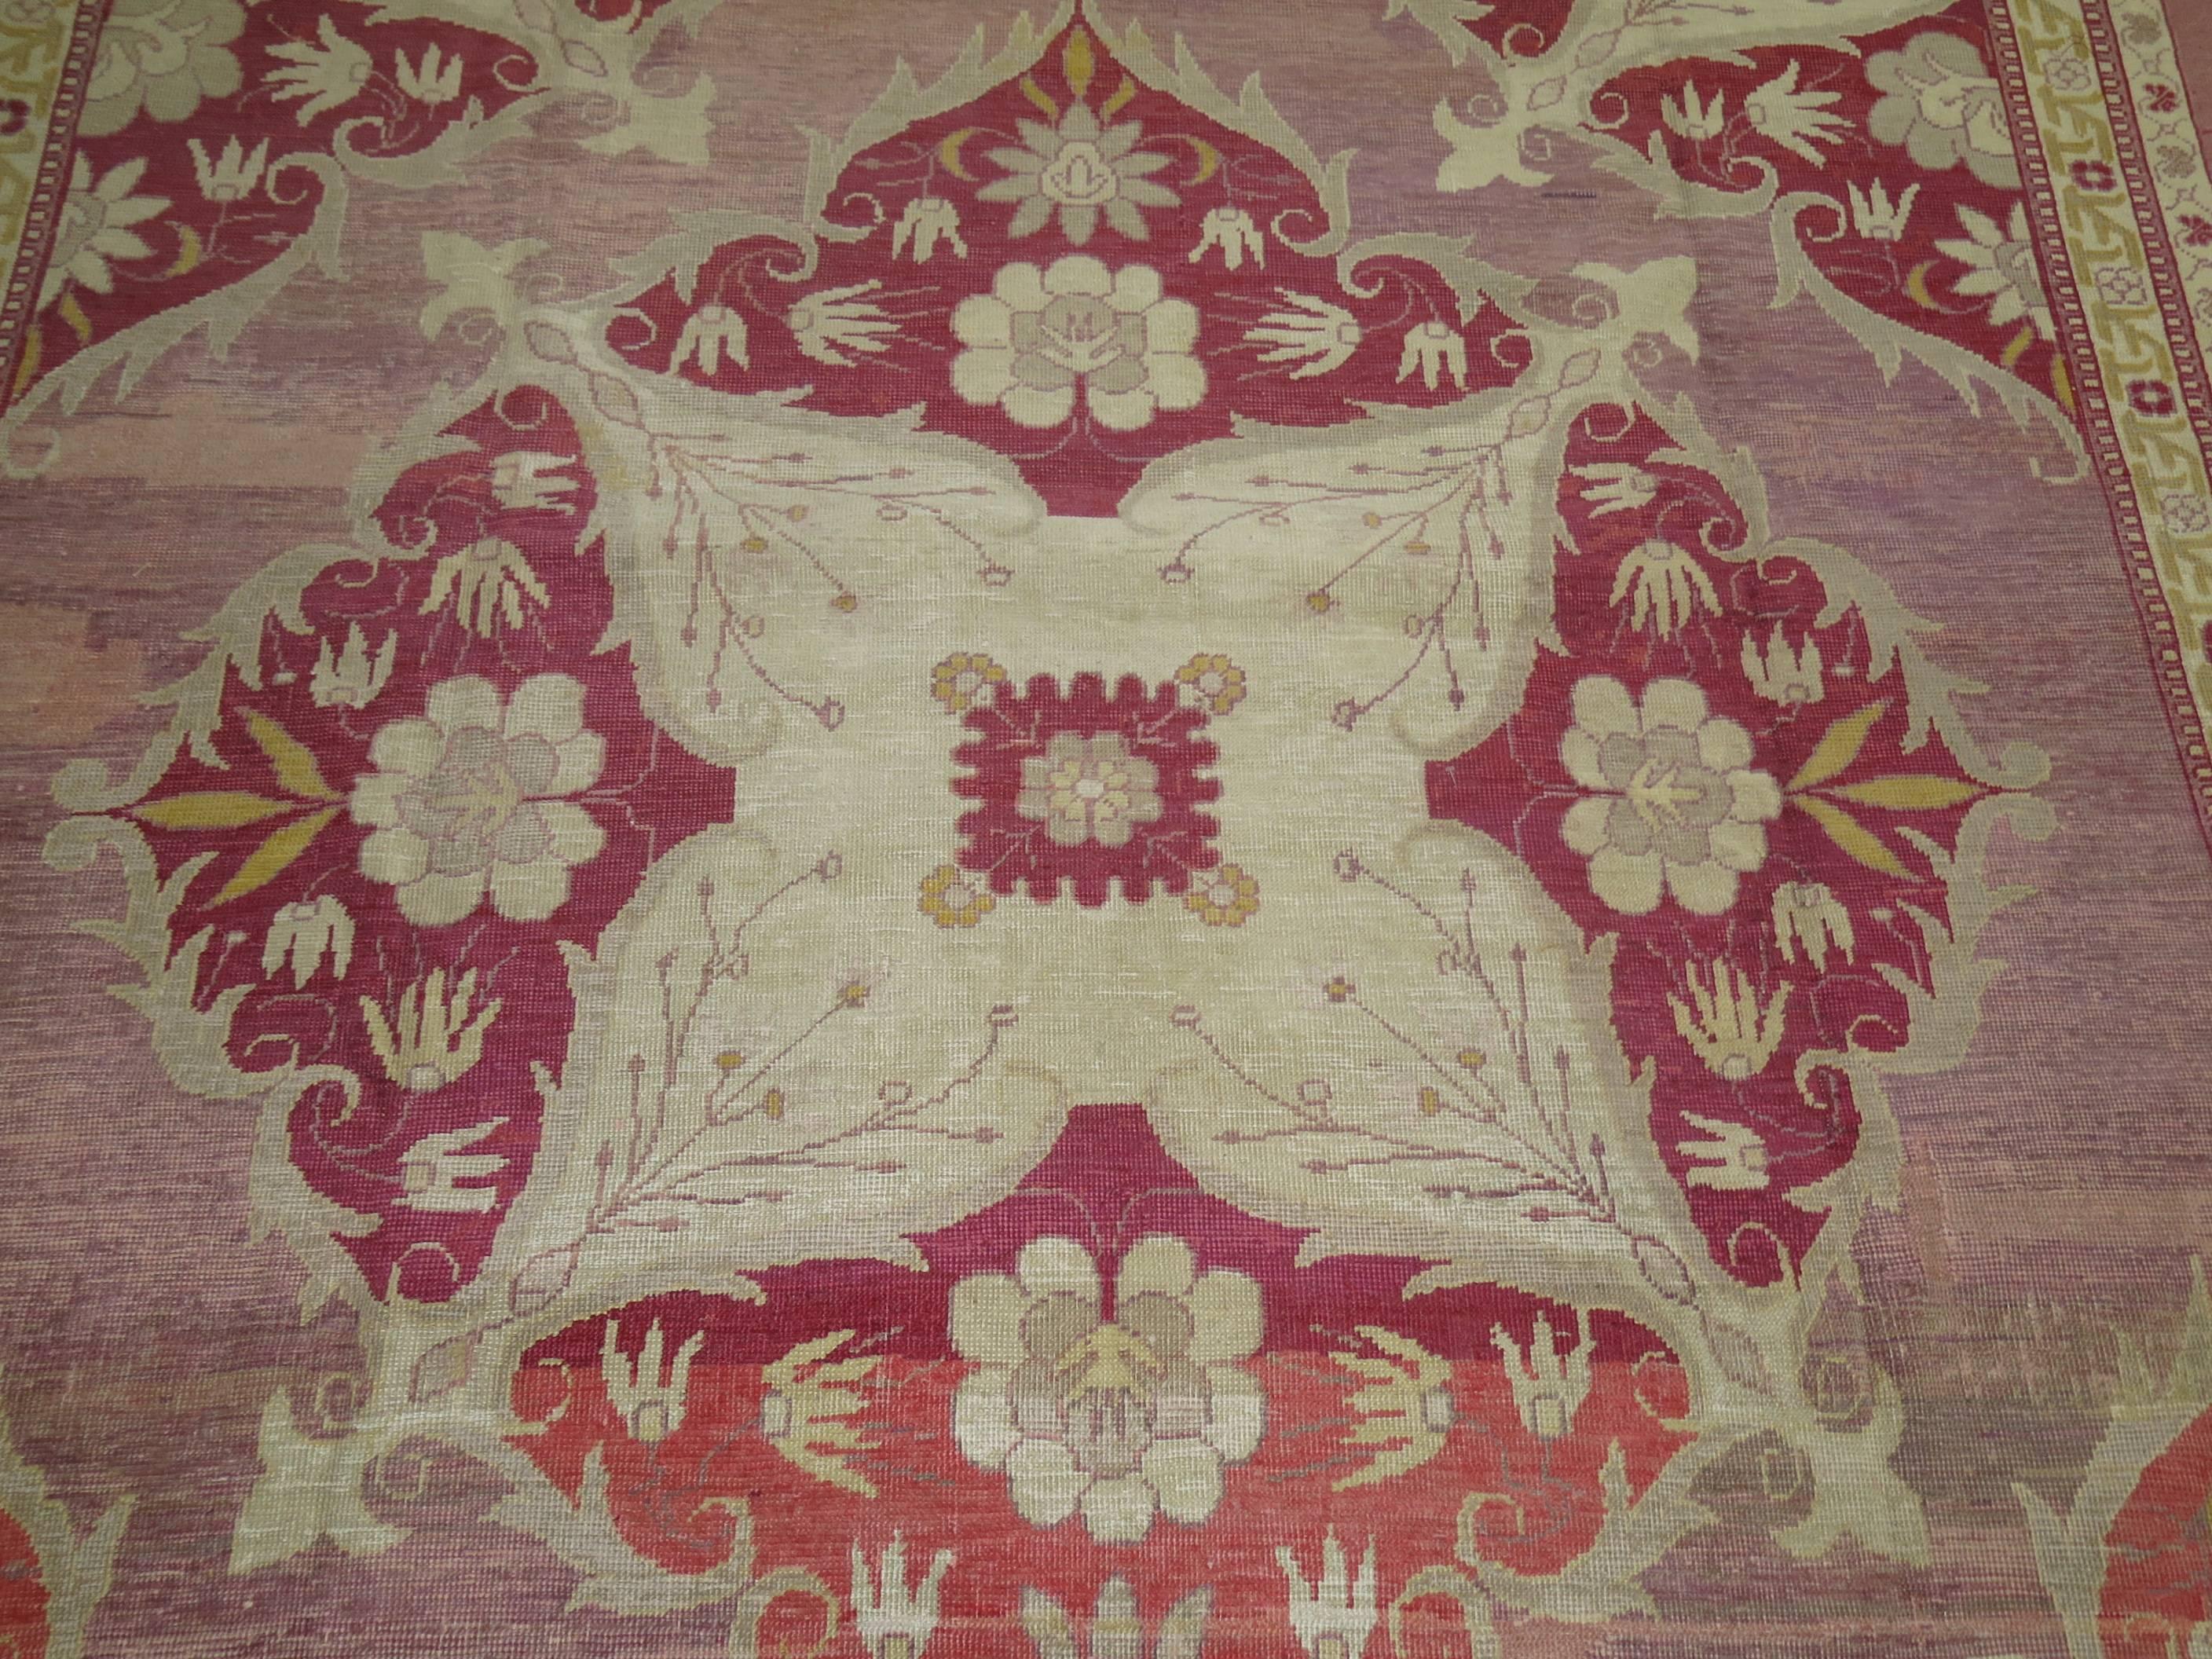 A rather unique Turkish  rug with beautiful burgundy, pink and lavender colors. The graphic and design on this rug make it even more extraordinary.  In the early 19th century, on the outskirts of Istanbul, the Hereke carpet workshop was established,